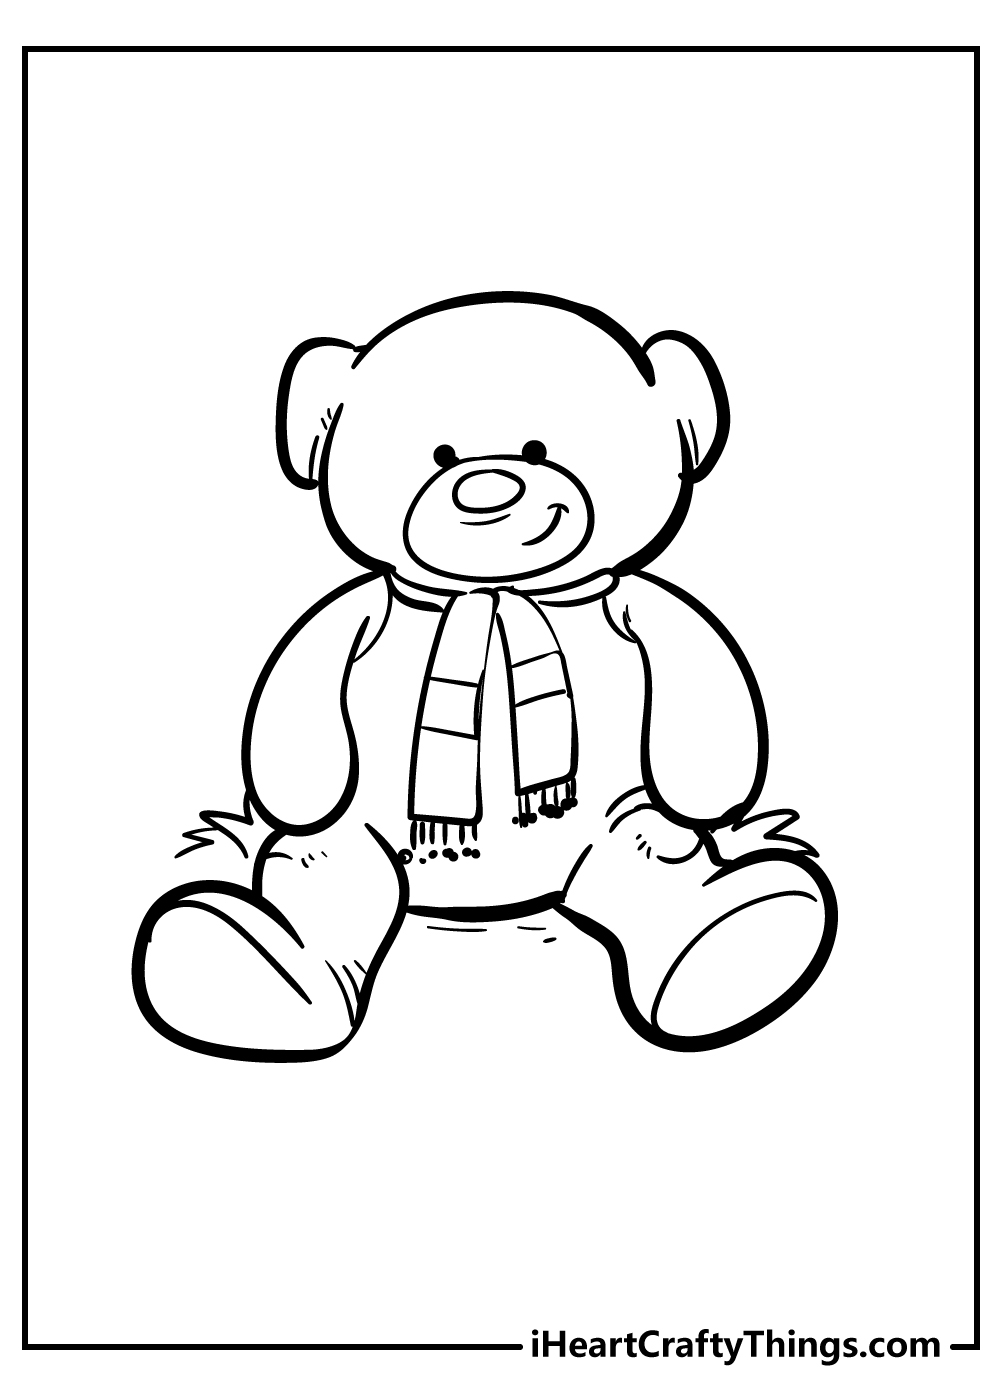 Teddy Bear Coloring Pages for preschoolers free printable